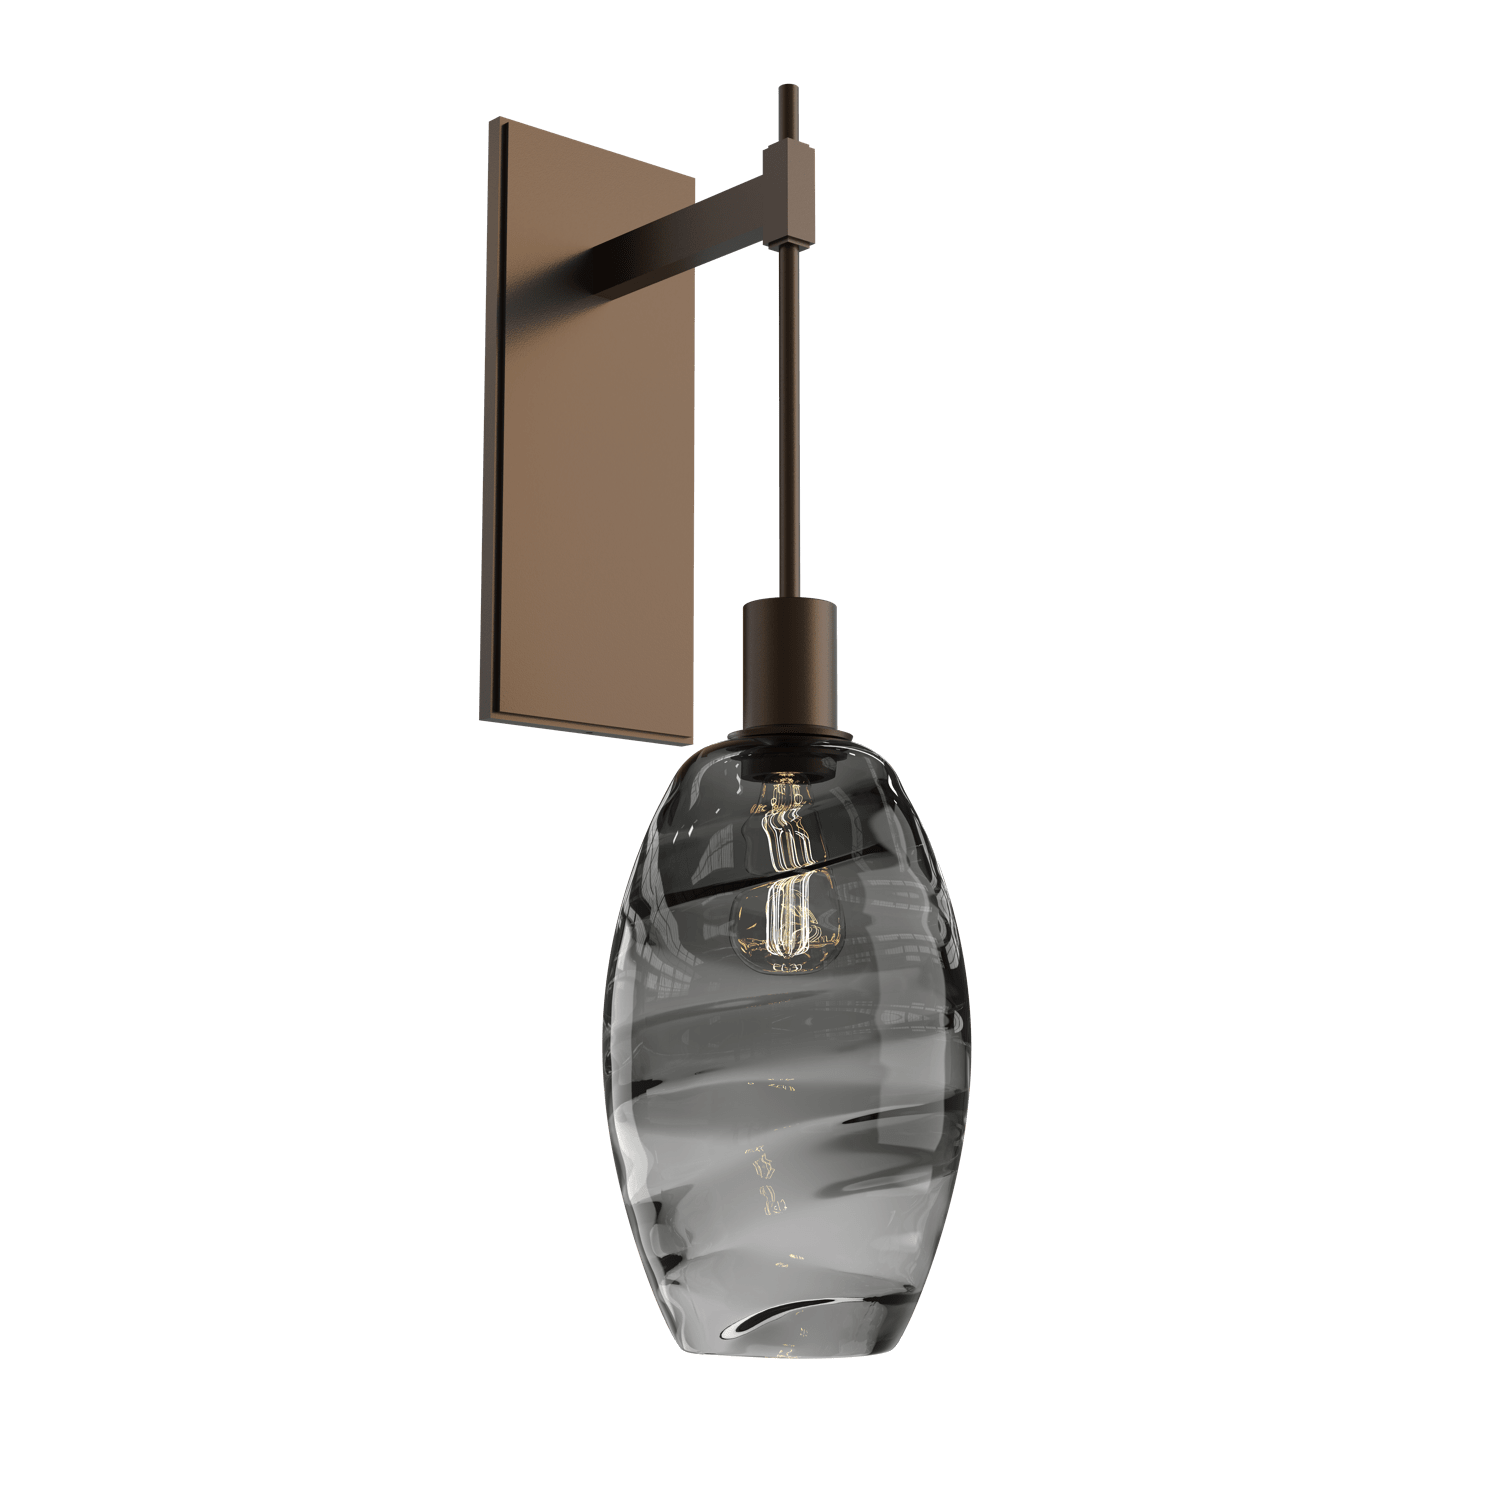 IDB0035-24-FB-OS-Hammerton-Studio-Optic-Blown-Glass-Elisse-tempo-wall-sconce-with-flat-bronze-finish-and-optic-smoke-blown-glass-shades-and-incandescent-lamping